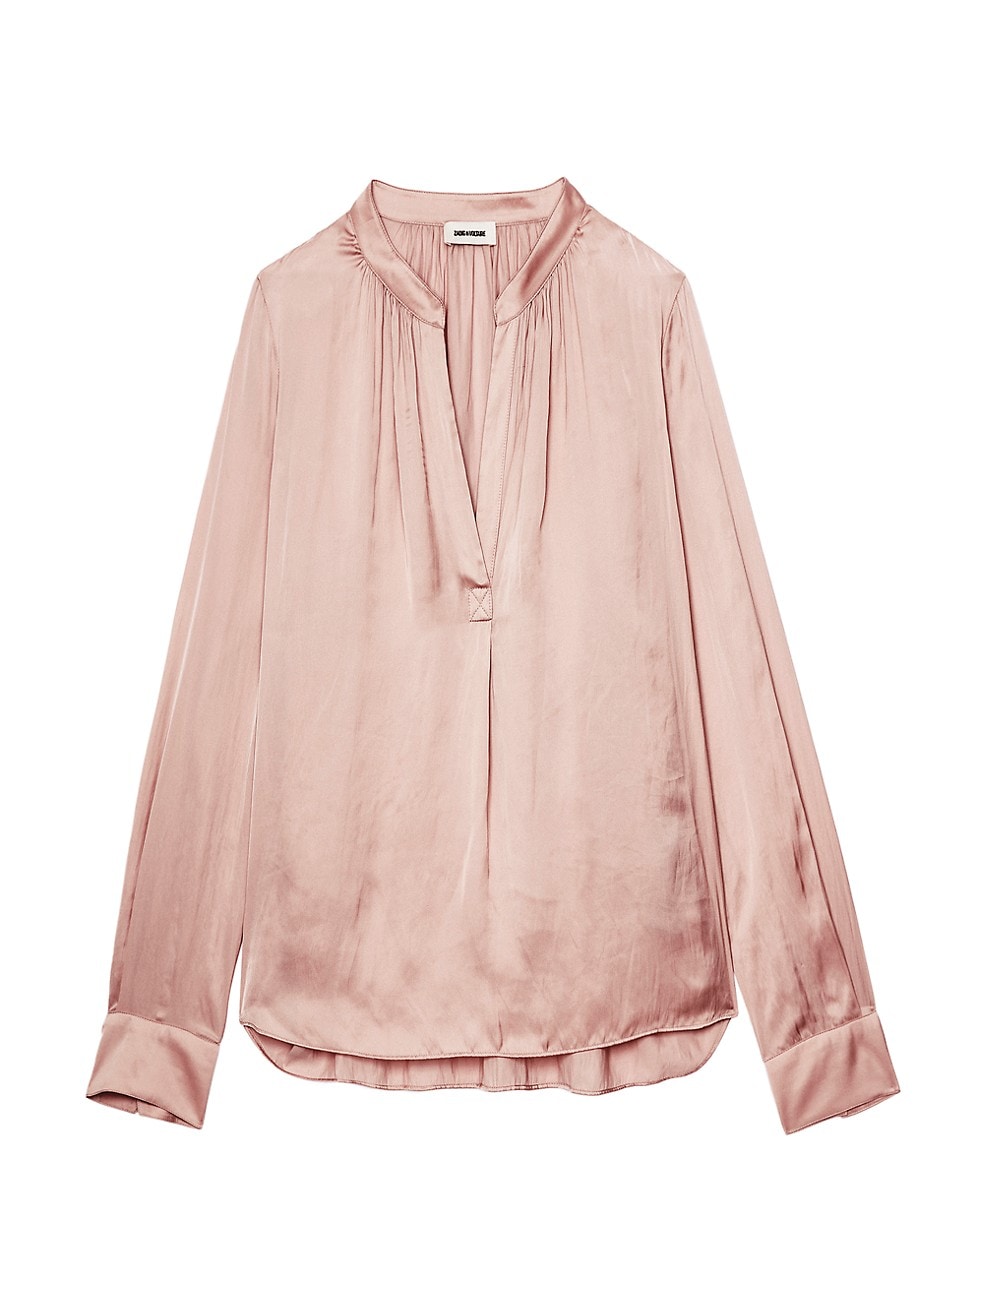 Zadig & Voltaire | Tink Satin Blouse